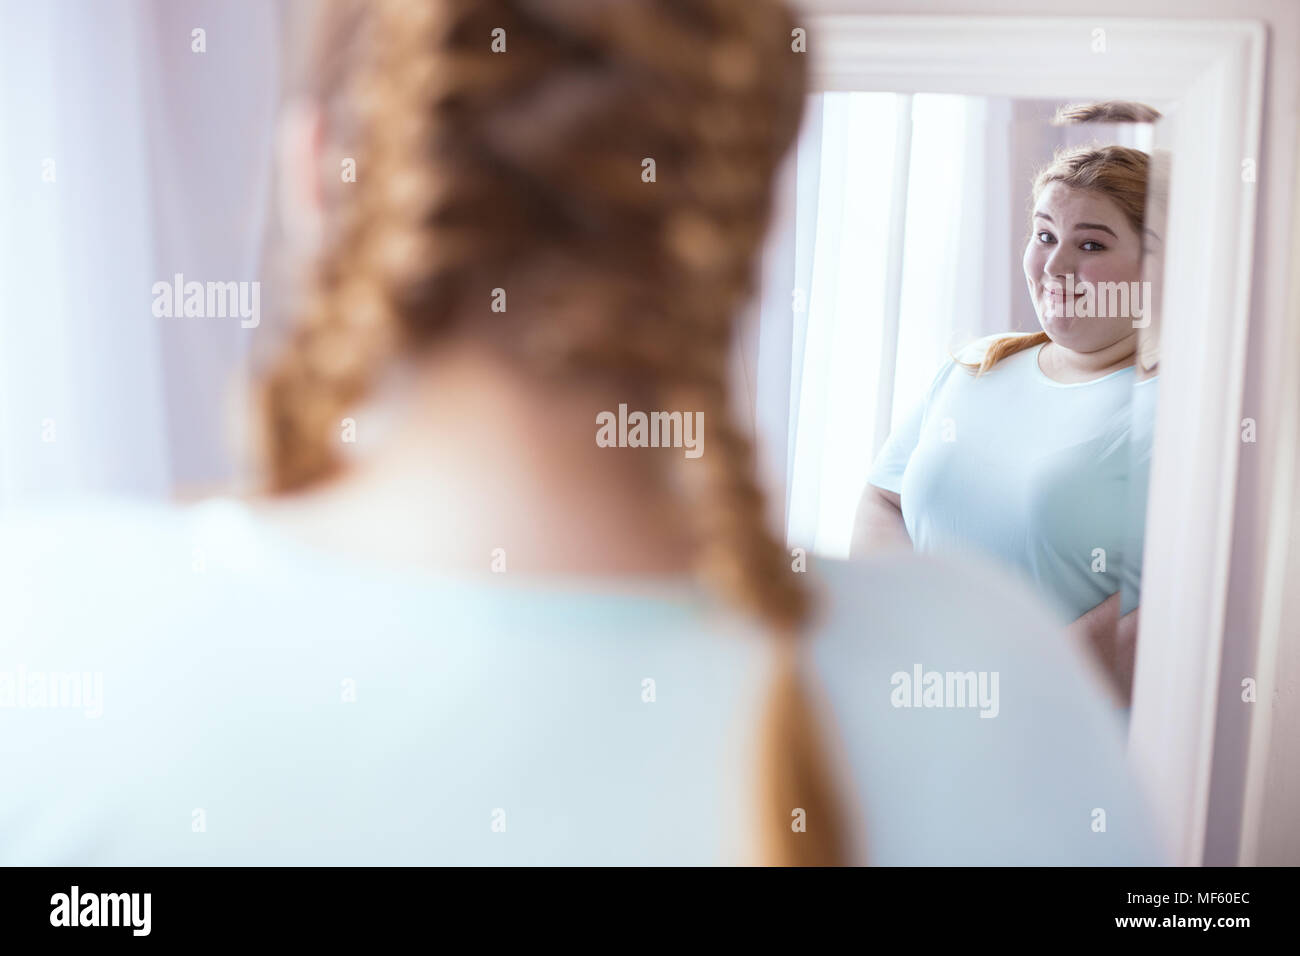 Delighted young woman looking in the mirror Stock Photo